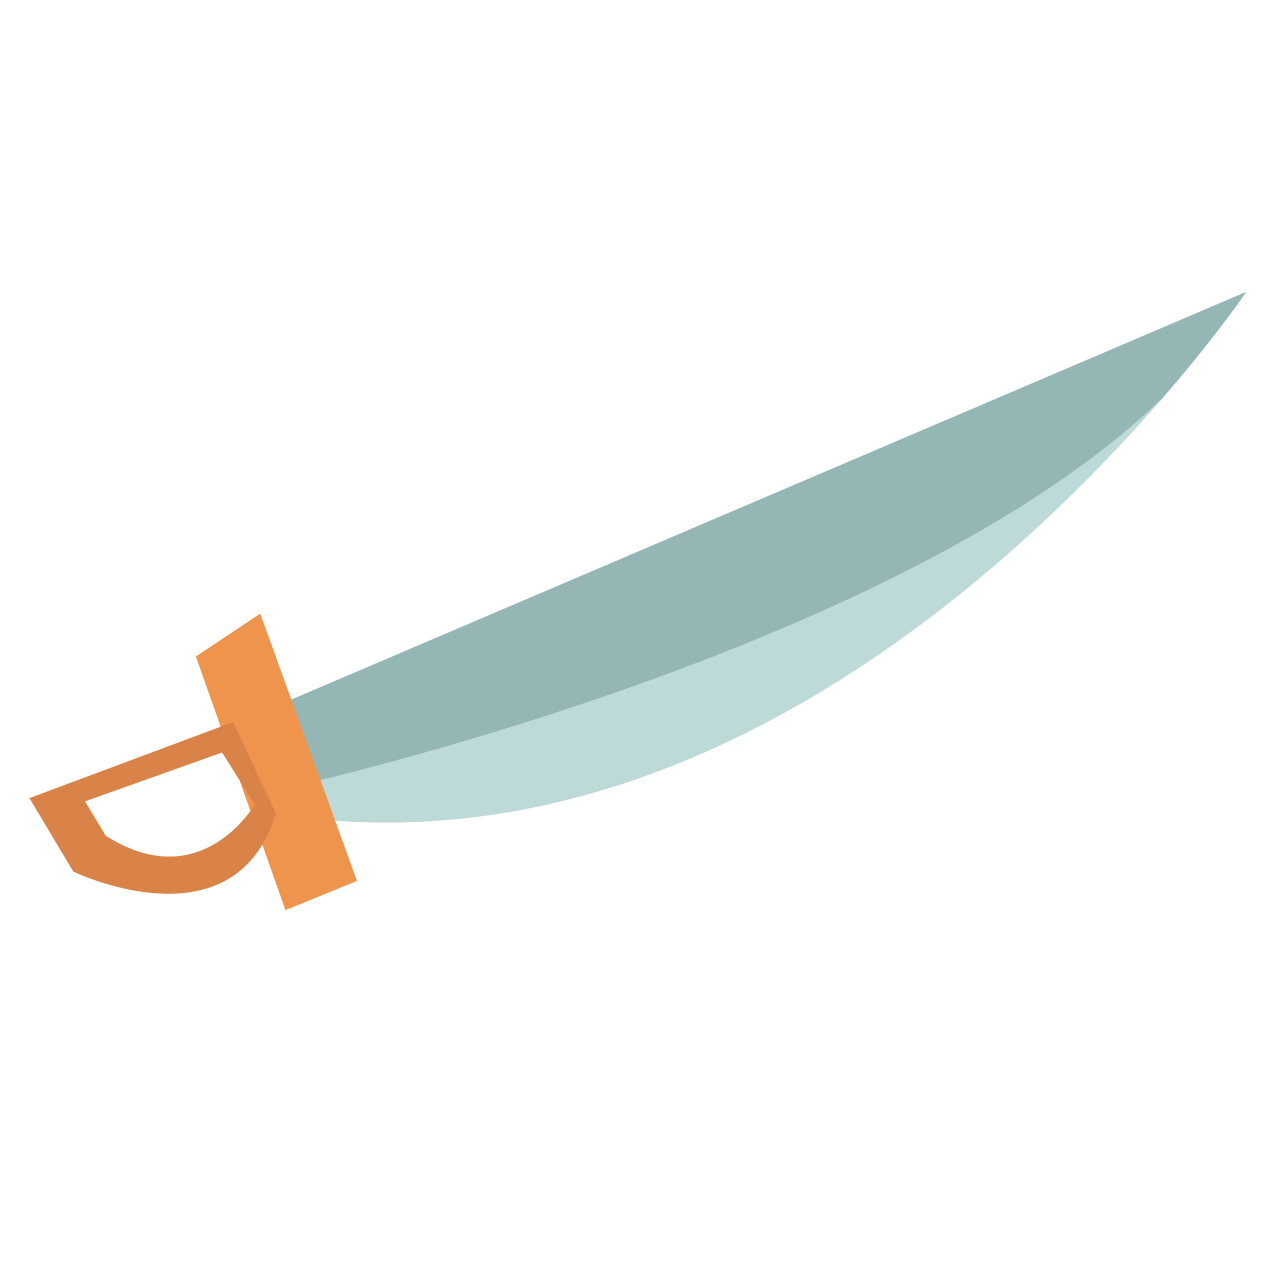 Weapon Drawing Sword Cartoon Free HQ Image Clipart